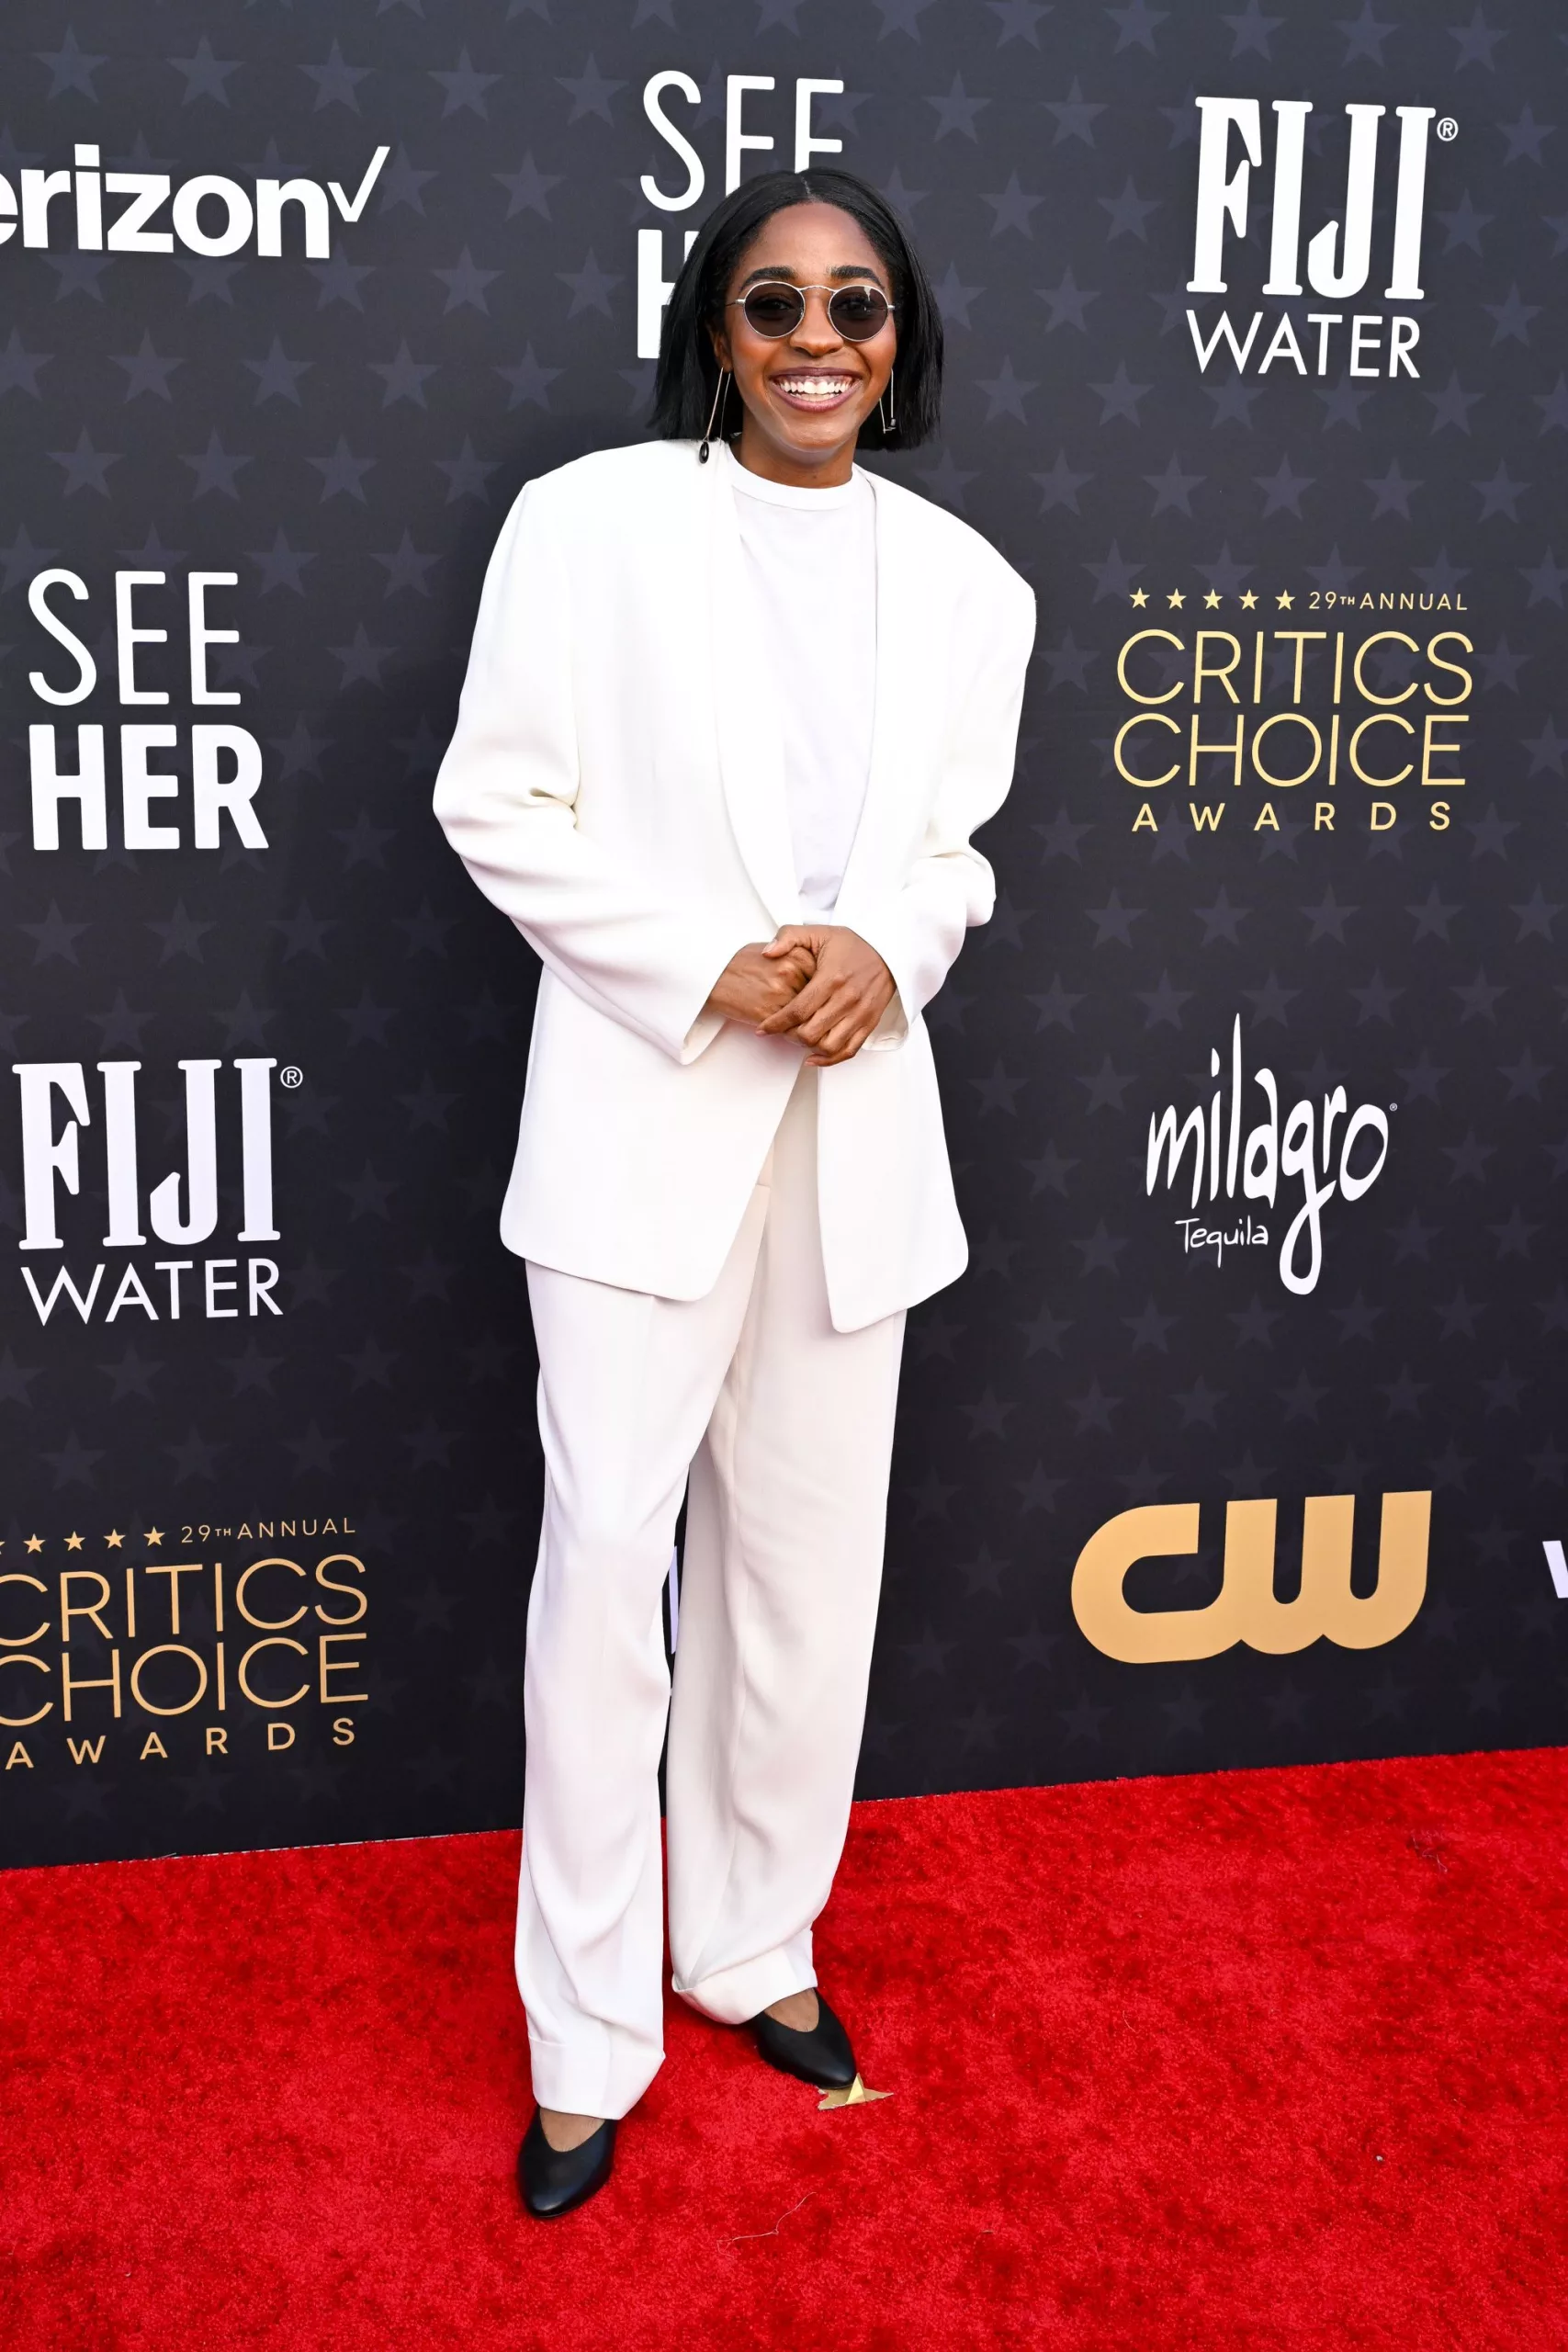 “The Bear” actress Ayo Edebiri arrived in an all-white suit, by the Olsen twins' label The Row, and Oliver Peoples sunglasses.